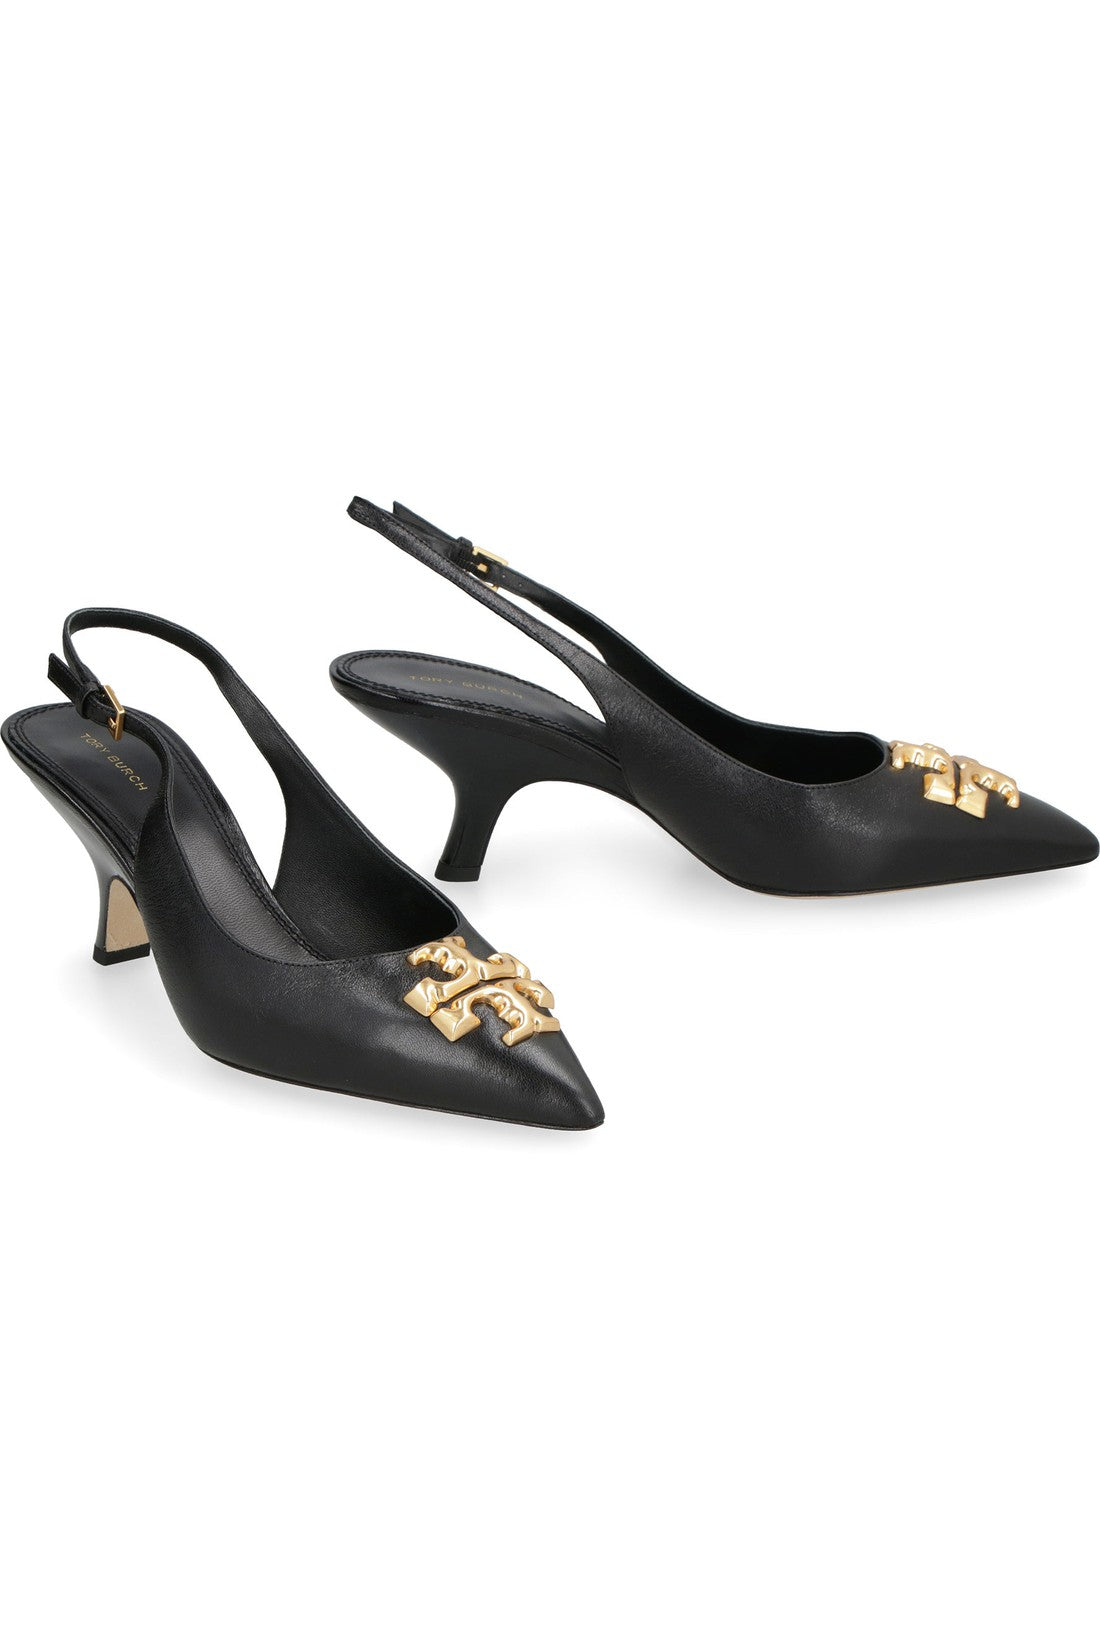 Tory Burch-OUTLET-SALE-Eleanor leather pointy-toe slingback-ARCHIVIST